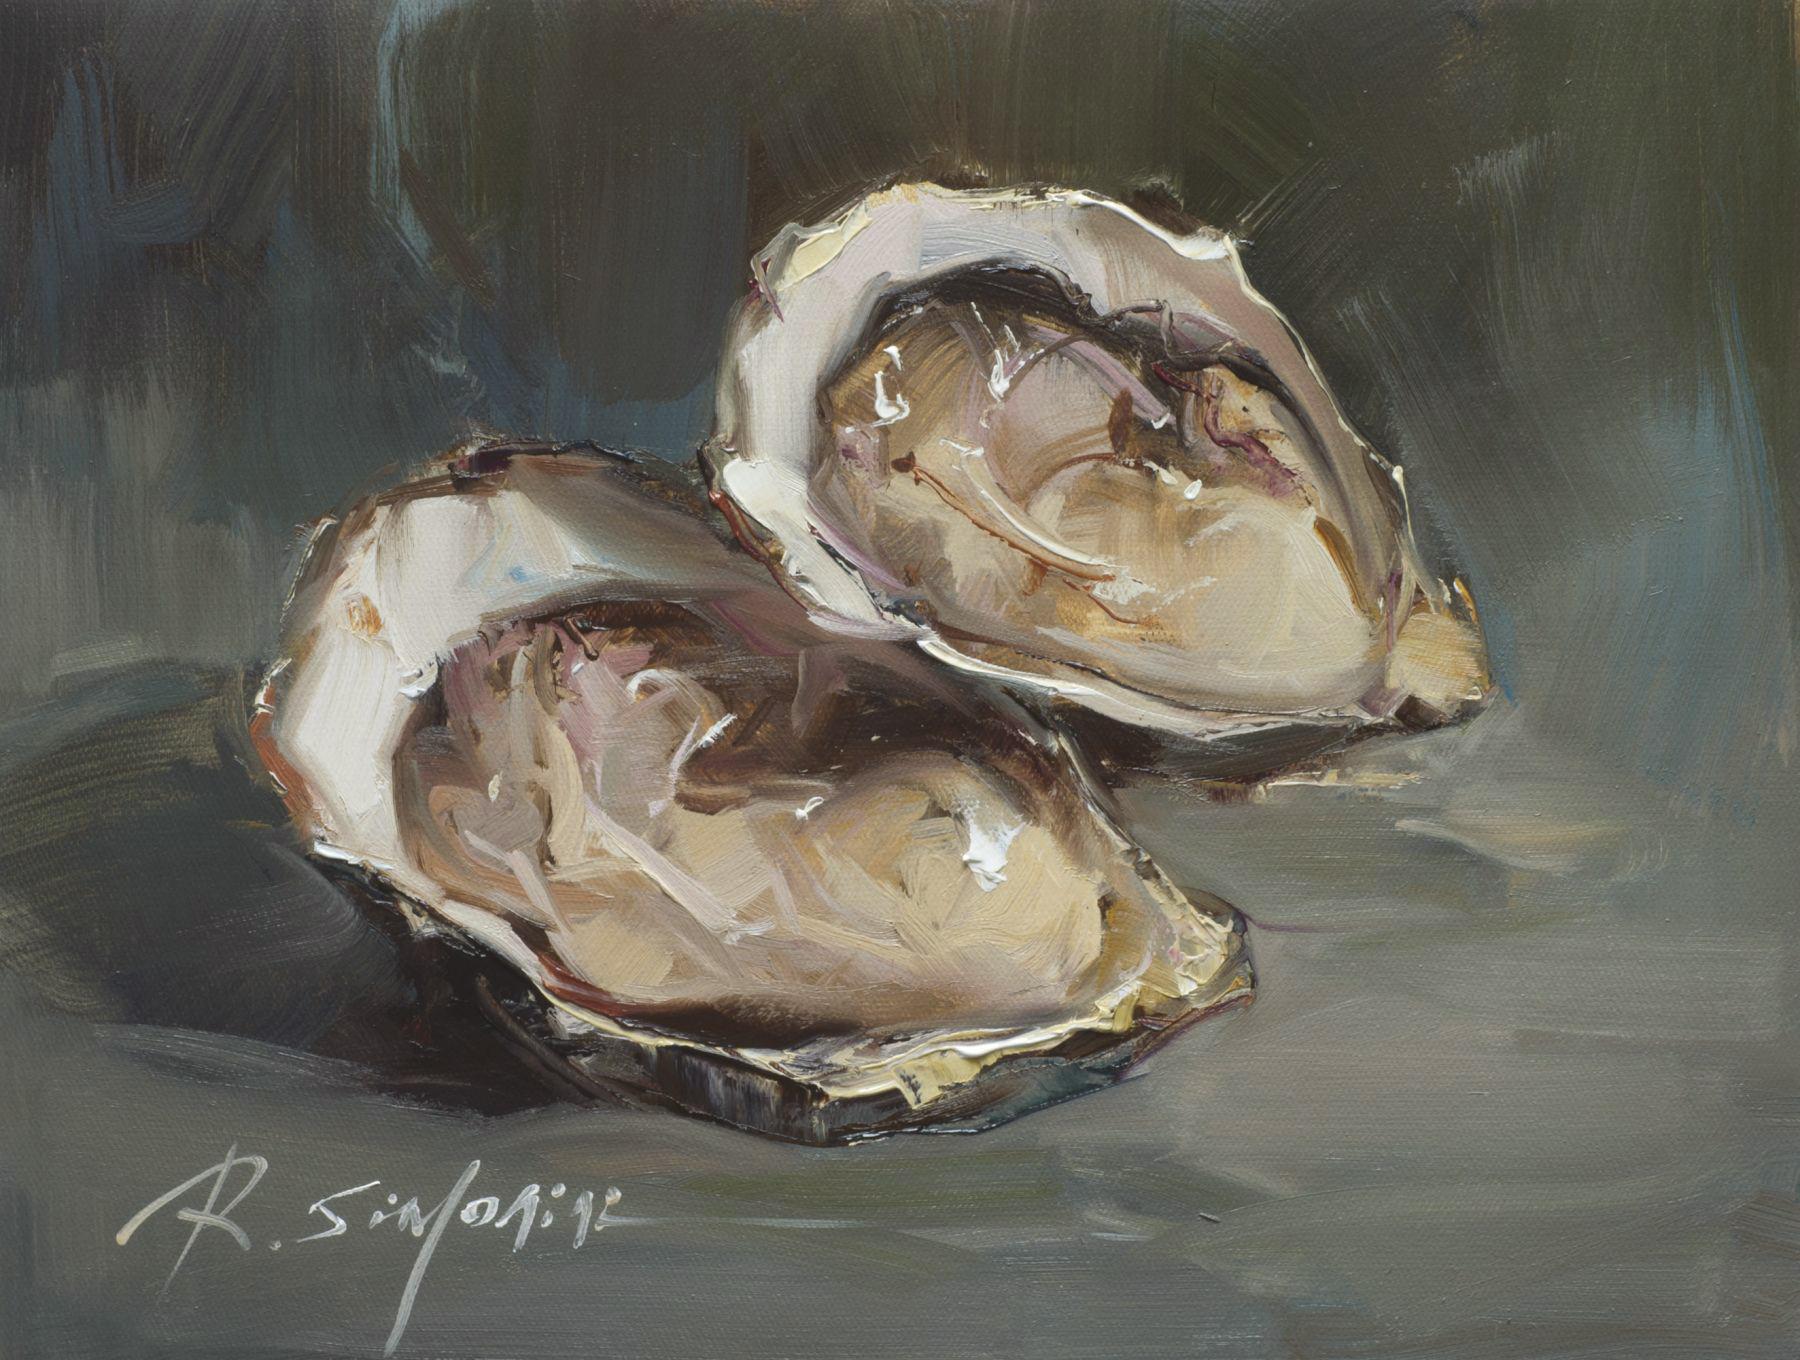 This painting by artist Ray Simonini titled " Pair of Oysters" is a 12x16 nautical oil painting on canvas featuring a close-up of two oyster shells against a deep green and blue background.

About the artist:
Simonini was born in China in 1981. He